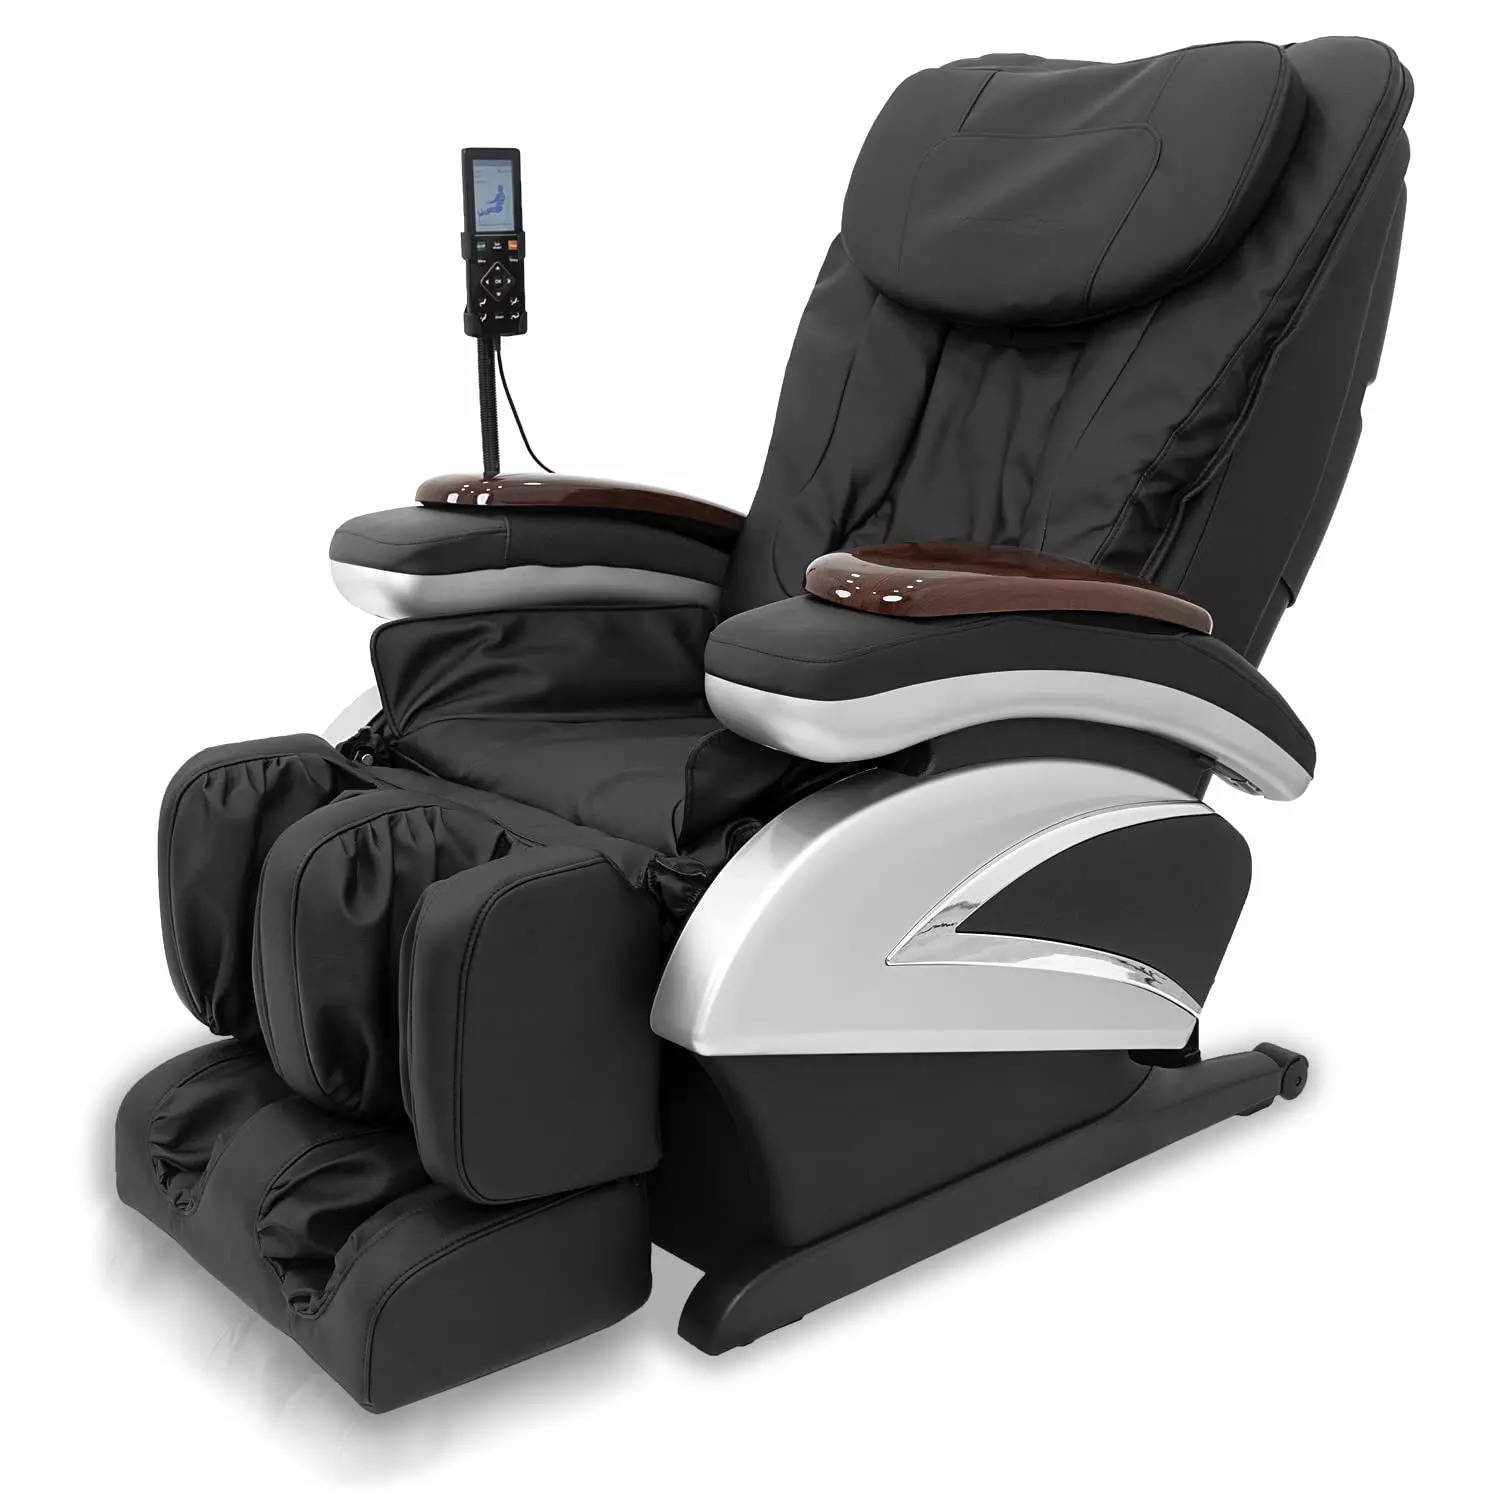 How to make your massage chair more comfortable